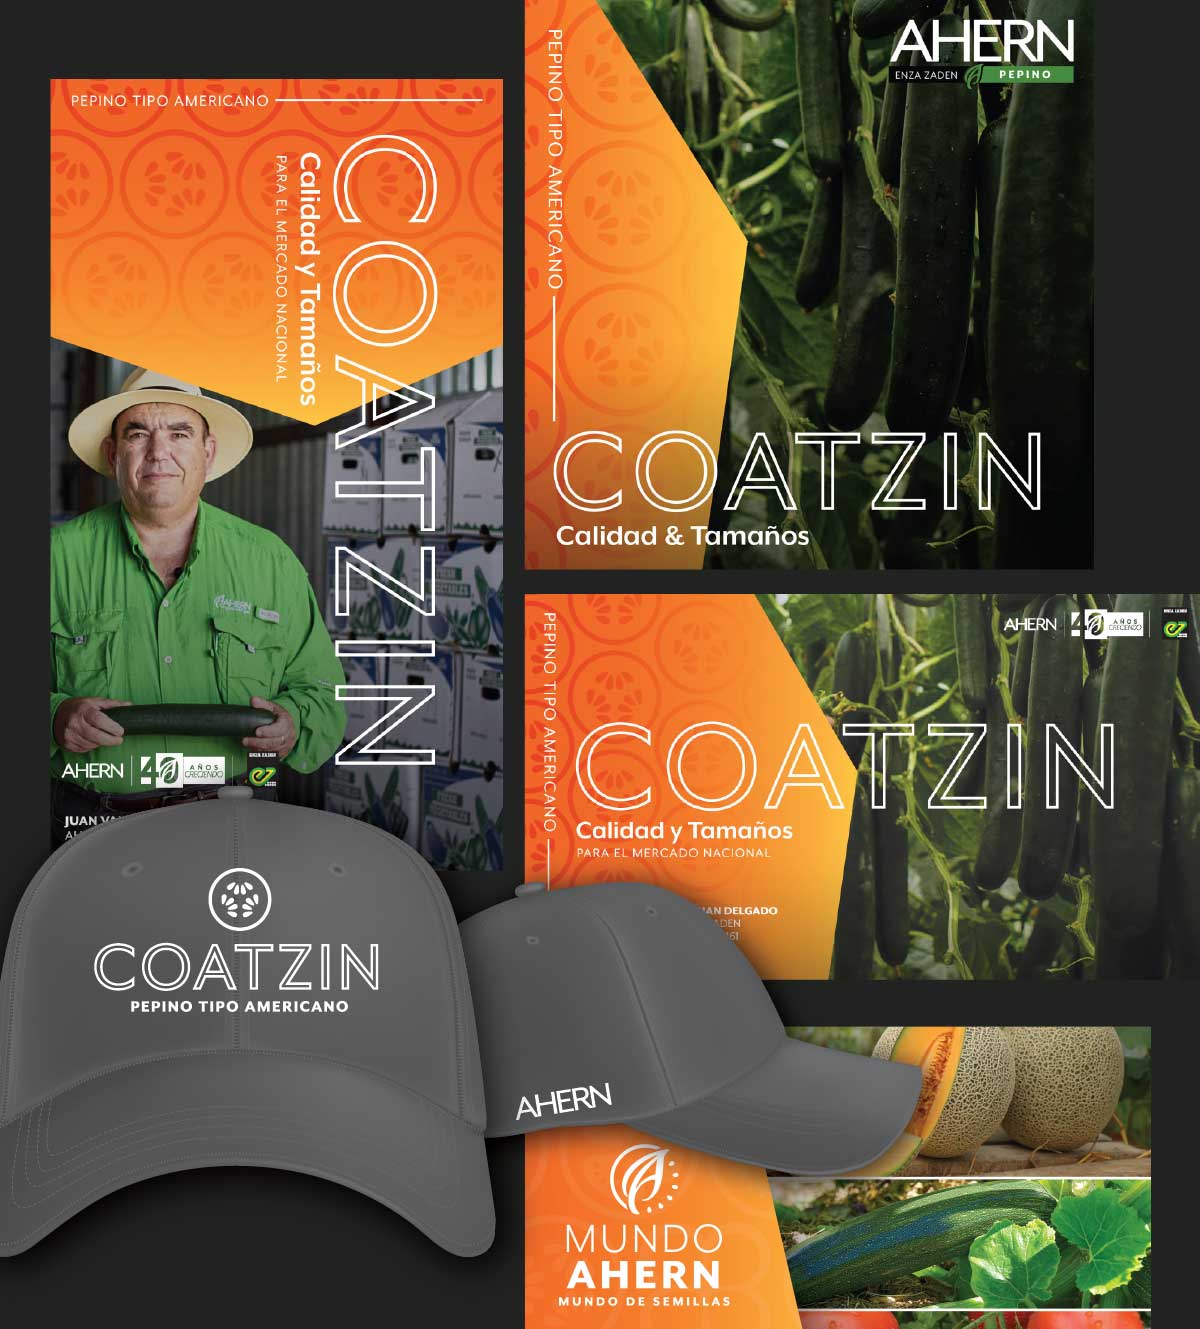 Ahern seeds graphics and hat mockup promoting coatzin